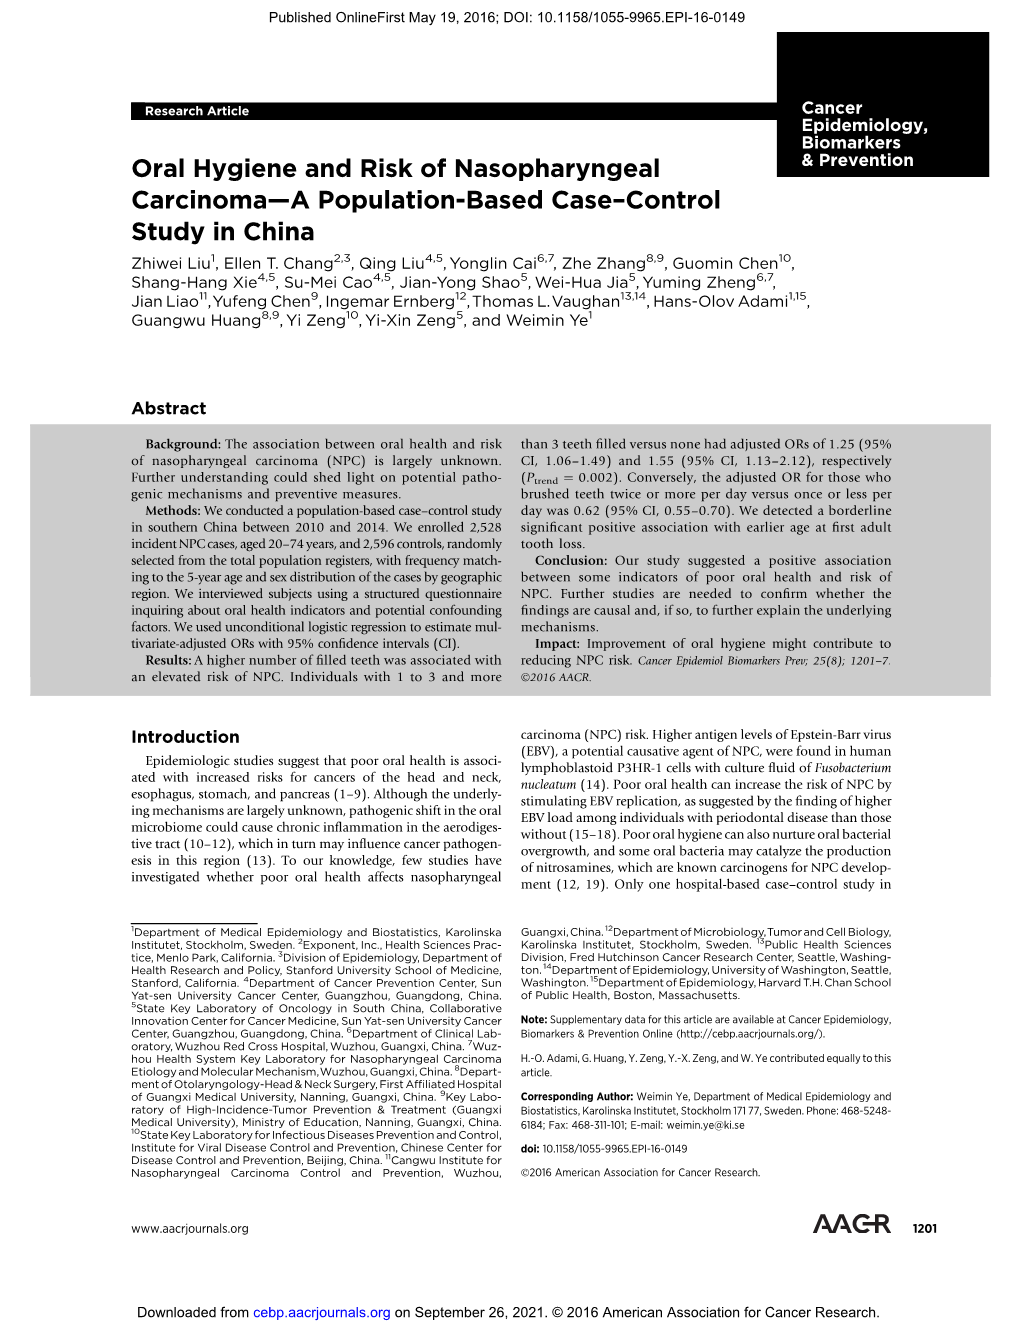 Oral Hygiene and Risk of Nasopharyngeal Carcinoma—A Population-Based Case–Control Study in China